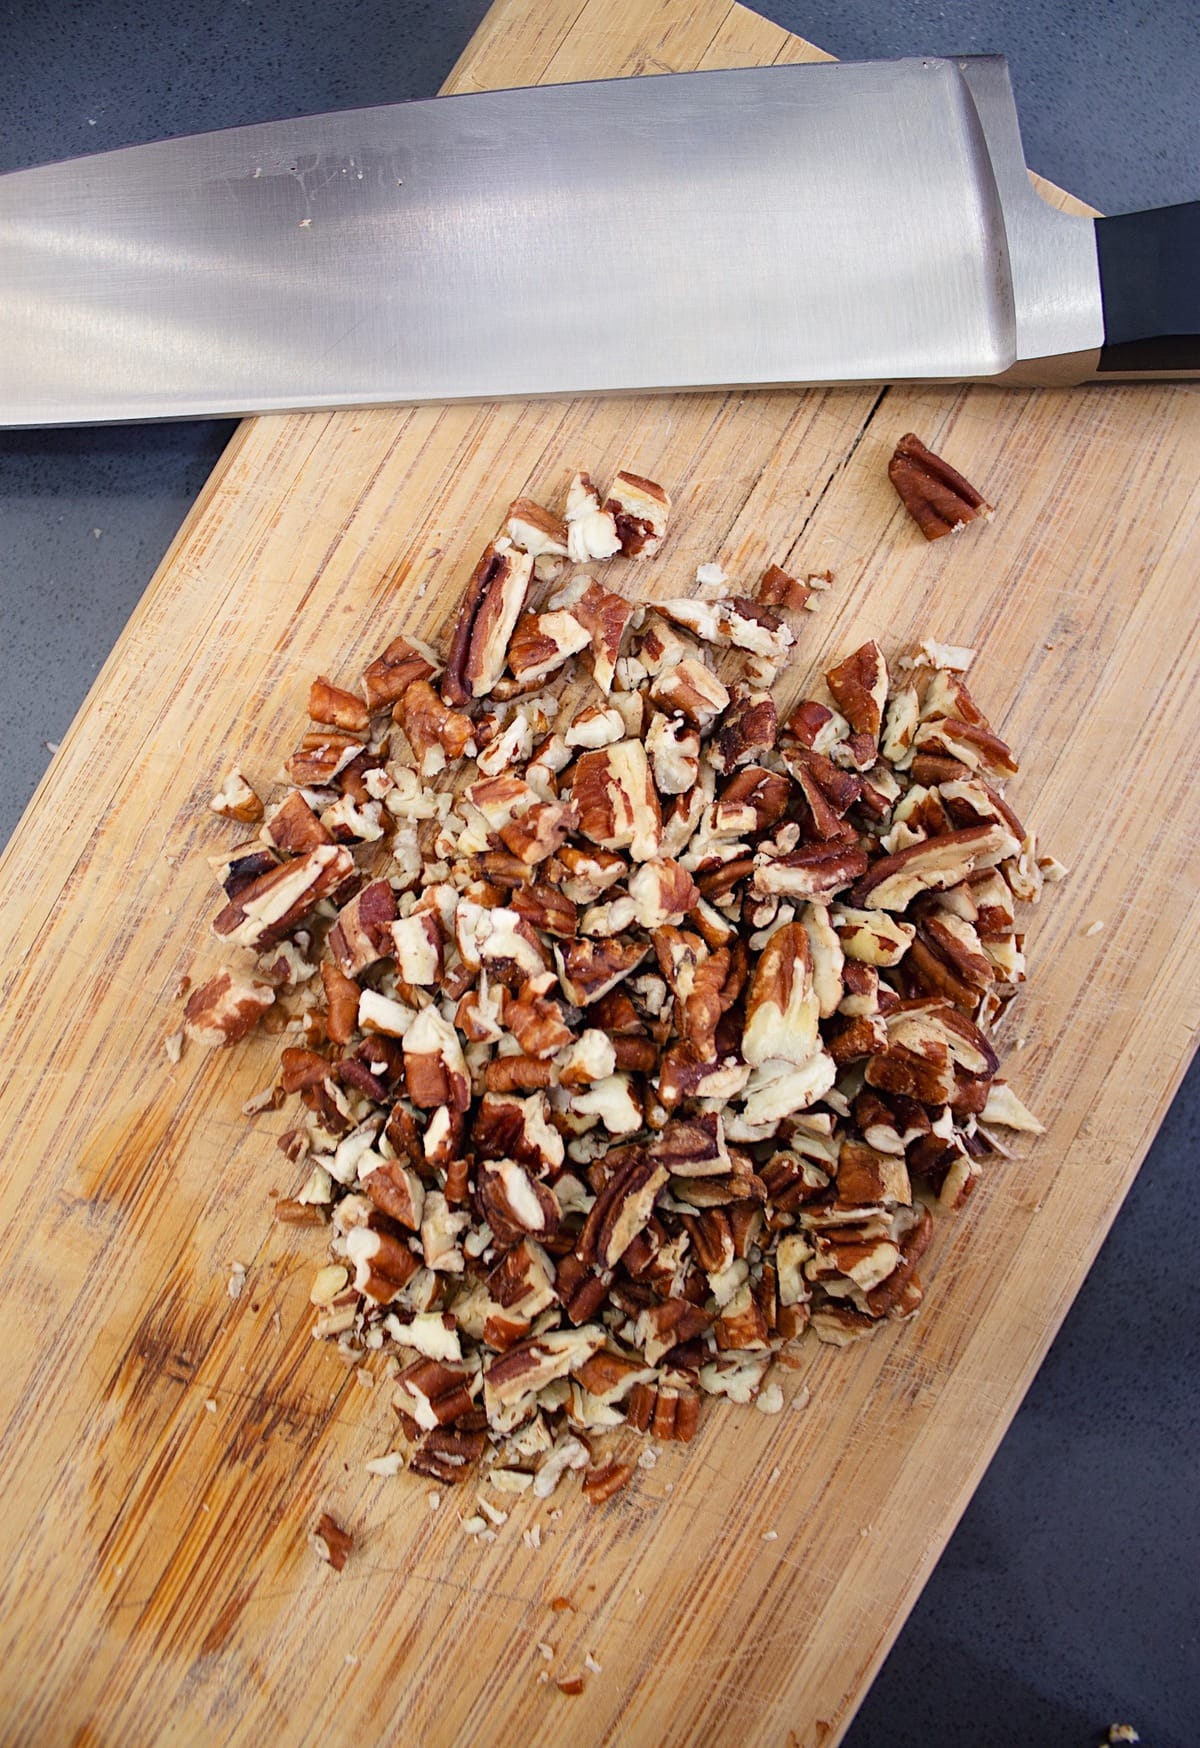 Chopped pecans resting on a cutting board next to a knife